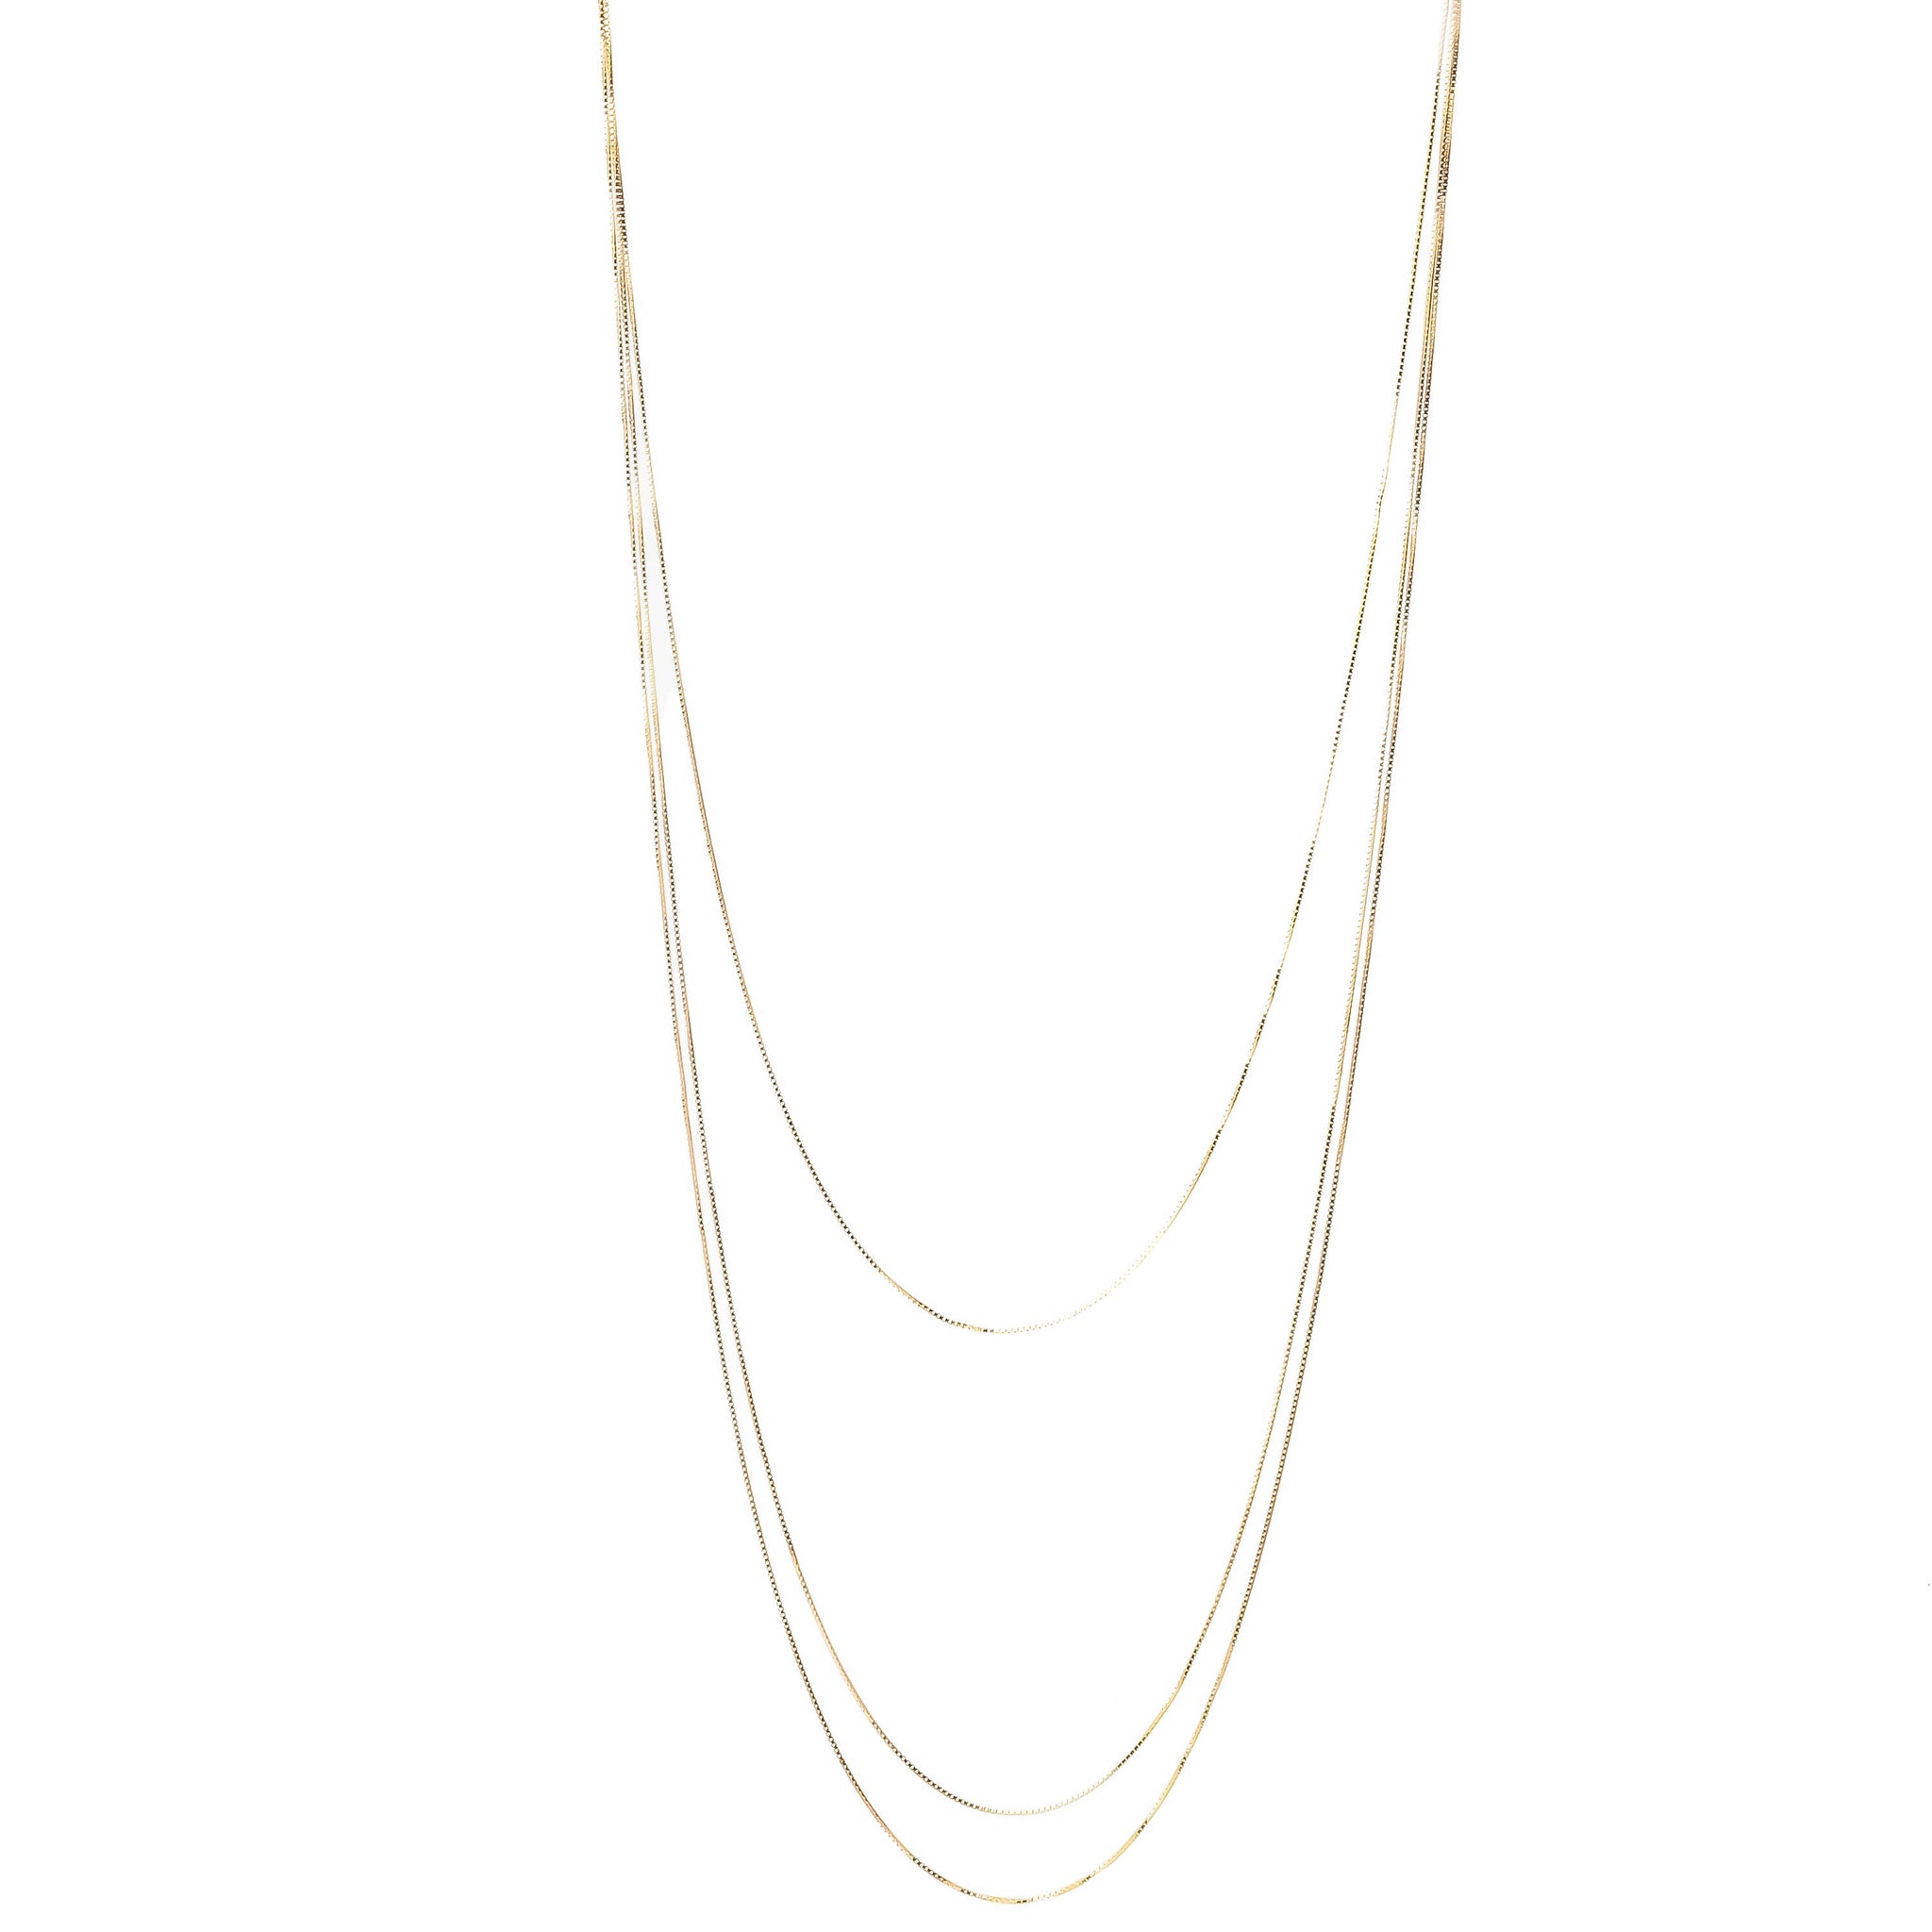 Thin gold necklace with 3 layers all different lengths 